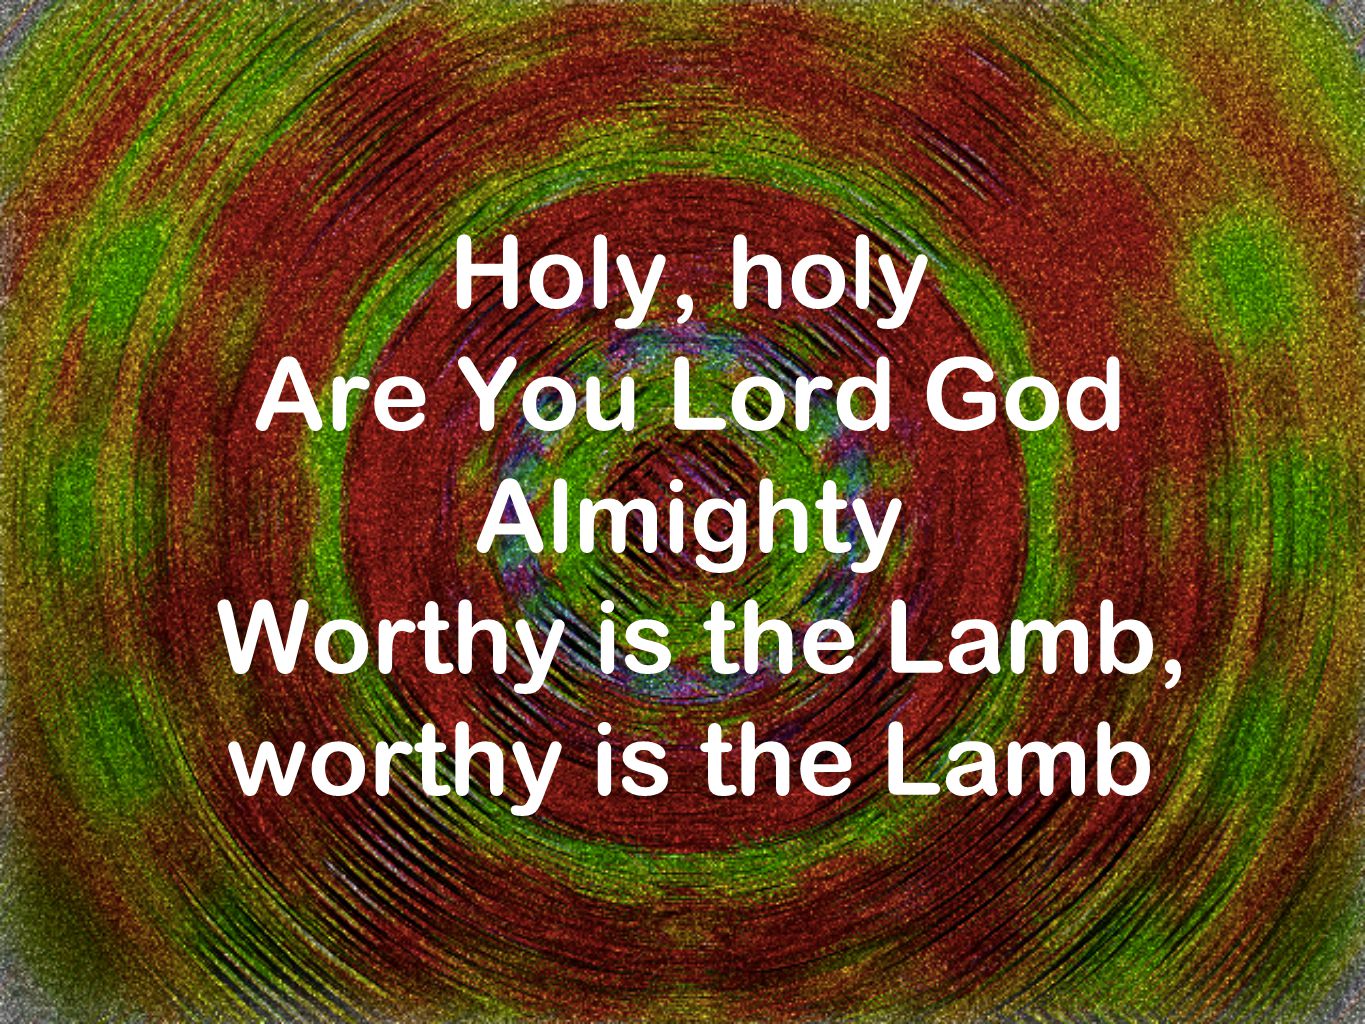 Holy, holy Are You Lord God Almighty Worthy is the Lamb, worthy is the Lamb